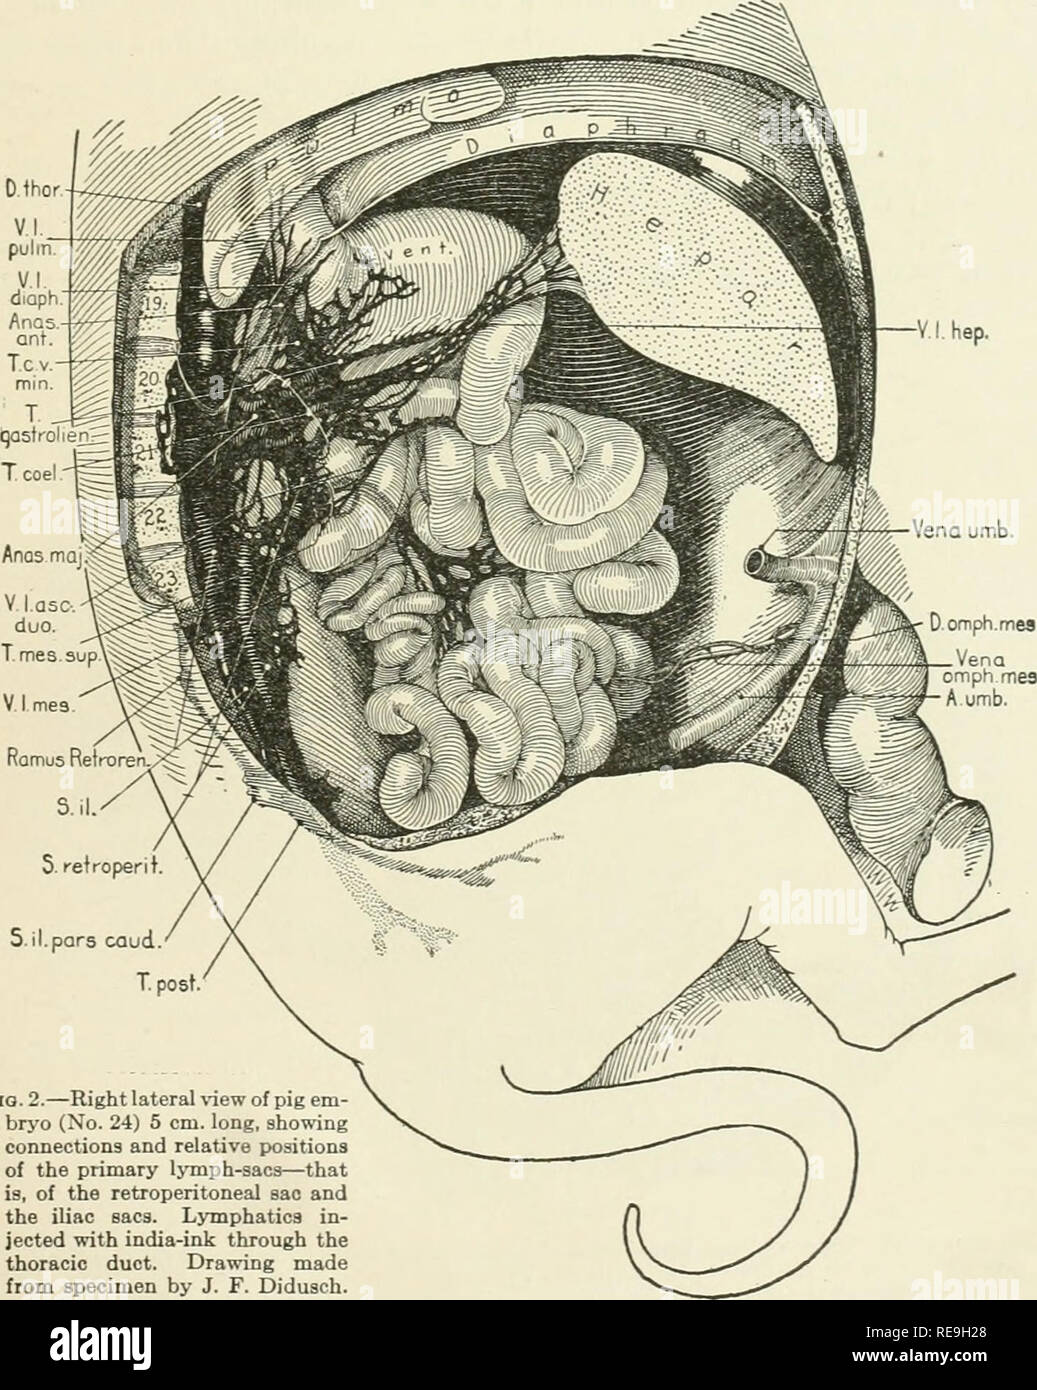 . Contributions to embryology. Embryology. FATE OF PRIMARY LYMPH-SACS IN ABDOMINAL REGION OF PIG, ETC. 23 first in the form of a film, but in older embryos as distinct vessels) over the adrenal capsule and the anterior pole of the kidney (fig. 3, V. 1. cap. gl. suprar.). As the trunk twines ventrally around the body of the pancreas, Ijinphatics are given off to the middle portion of that organ. These pancreatic vessels are not shown in figure 3, but would come off in front of the lower portion of the trunk of the lesser curvature (T. c. V. min.). Laterally, vessels pass from the mesial trunk t Stock Photo